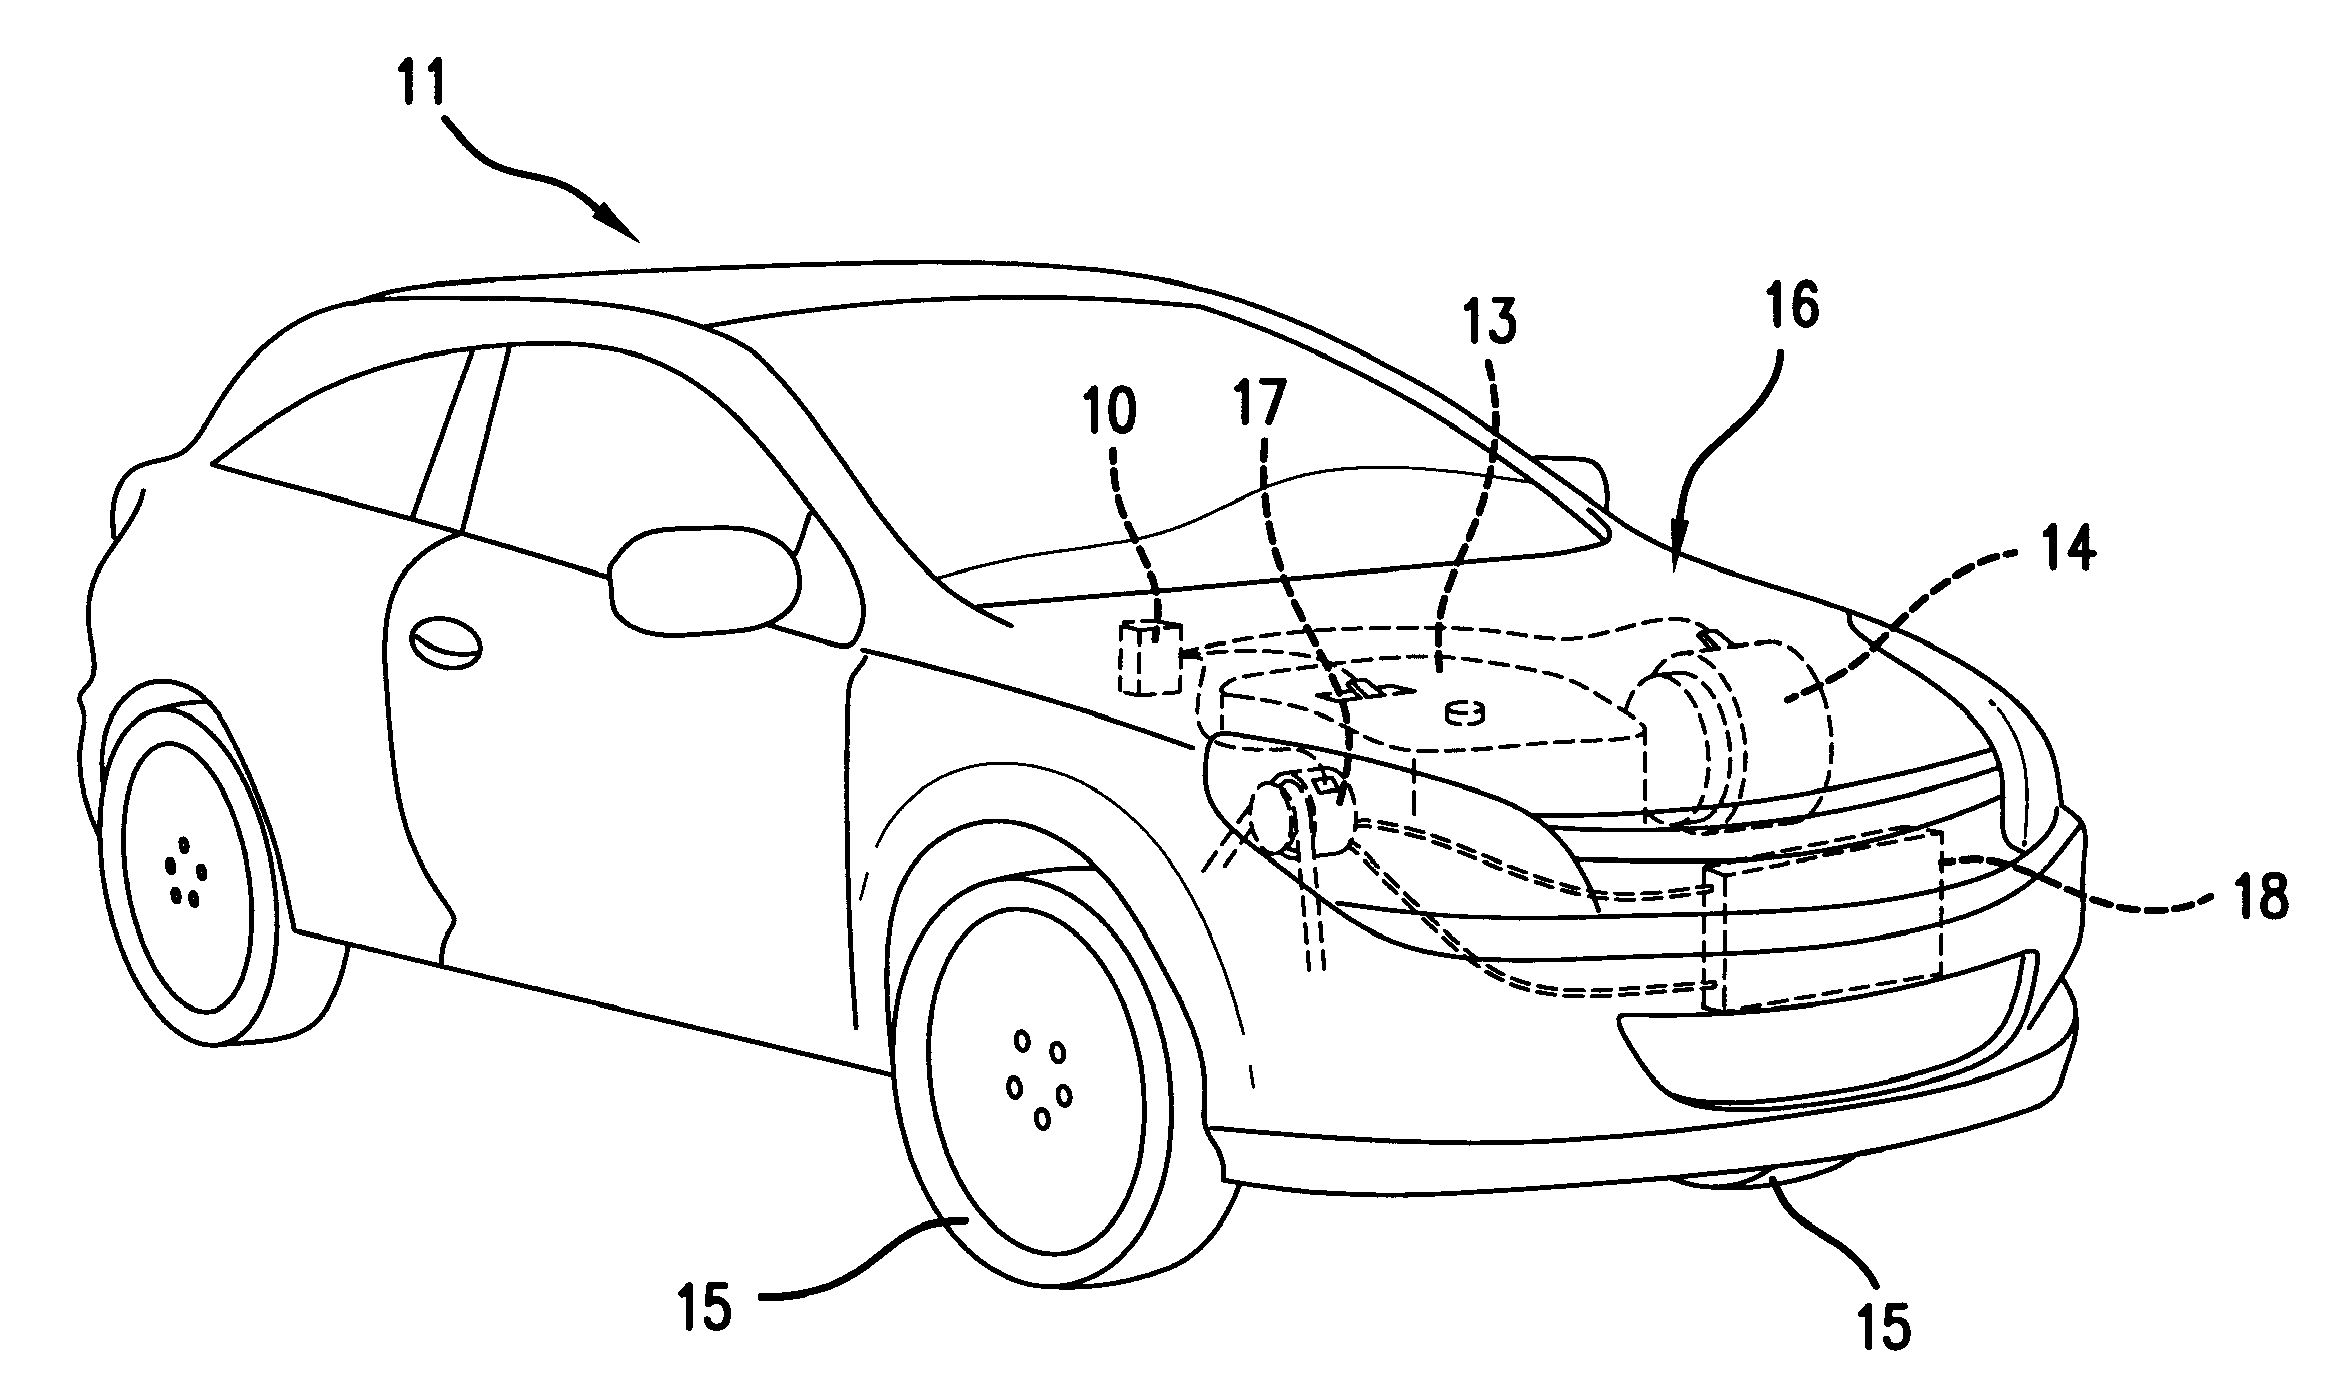 Methods of Optimizing Vehicular Air Conditioning Control Systems